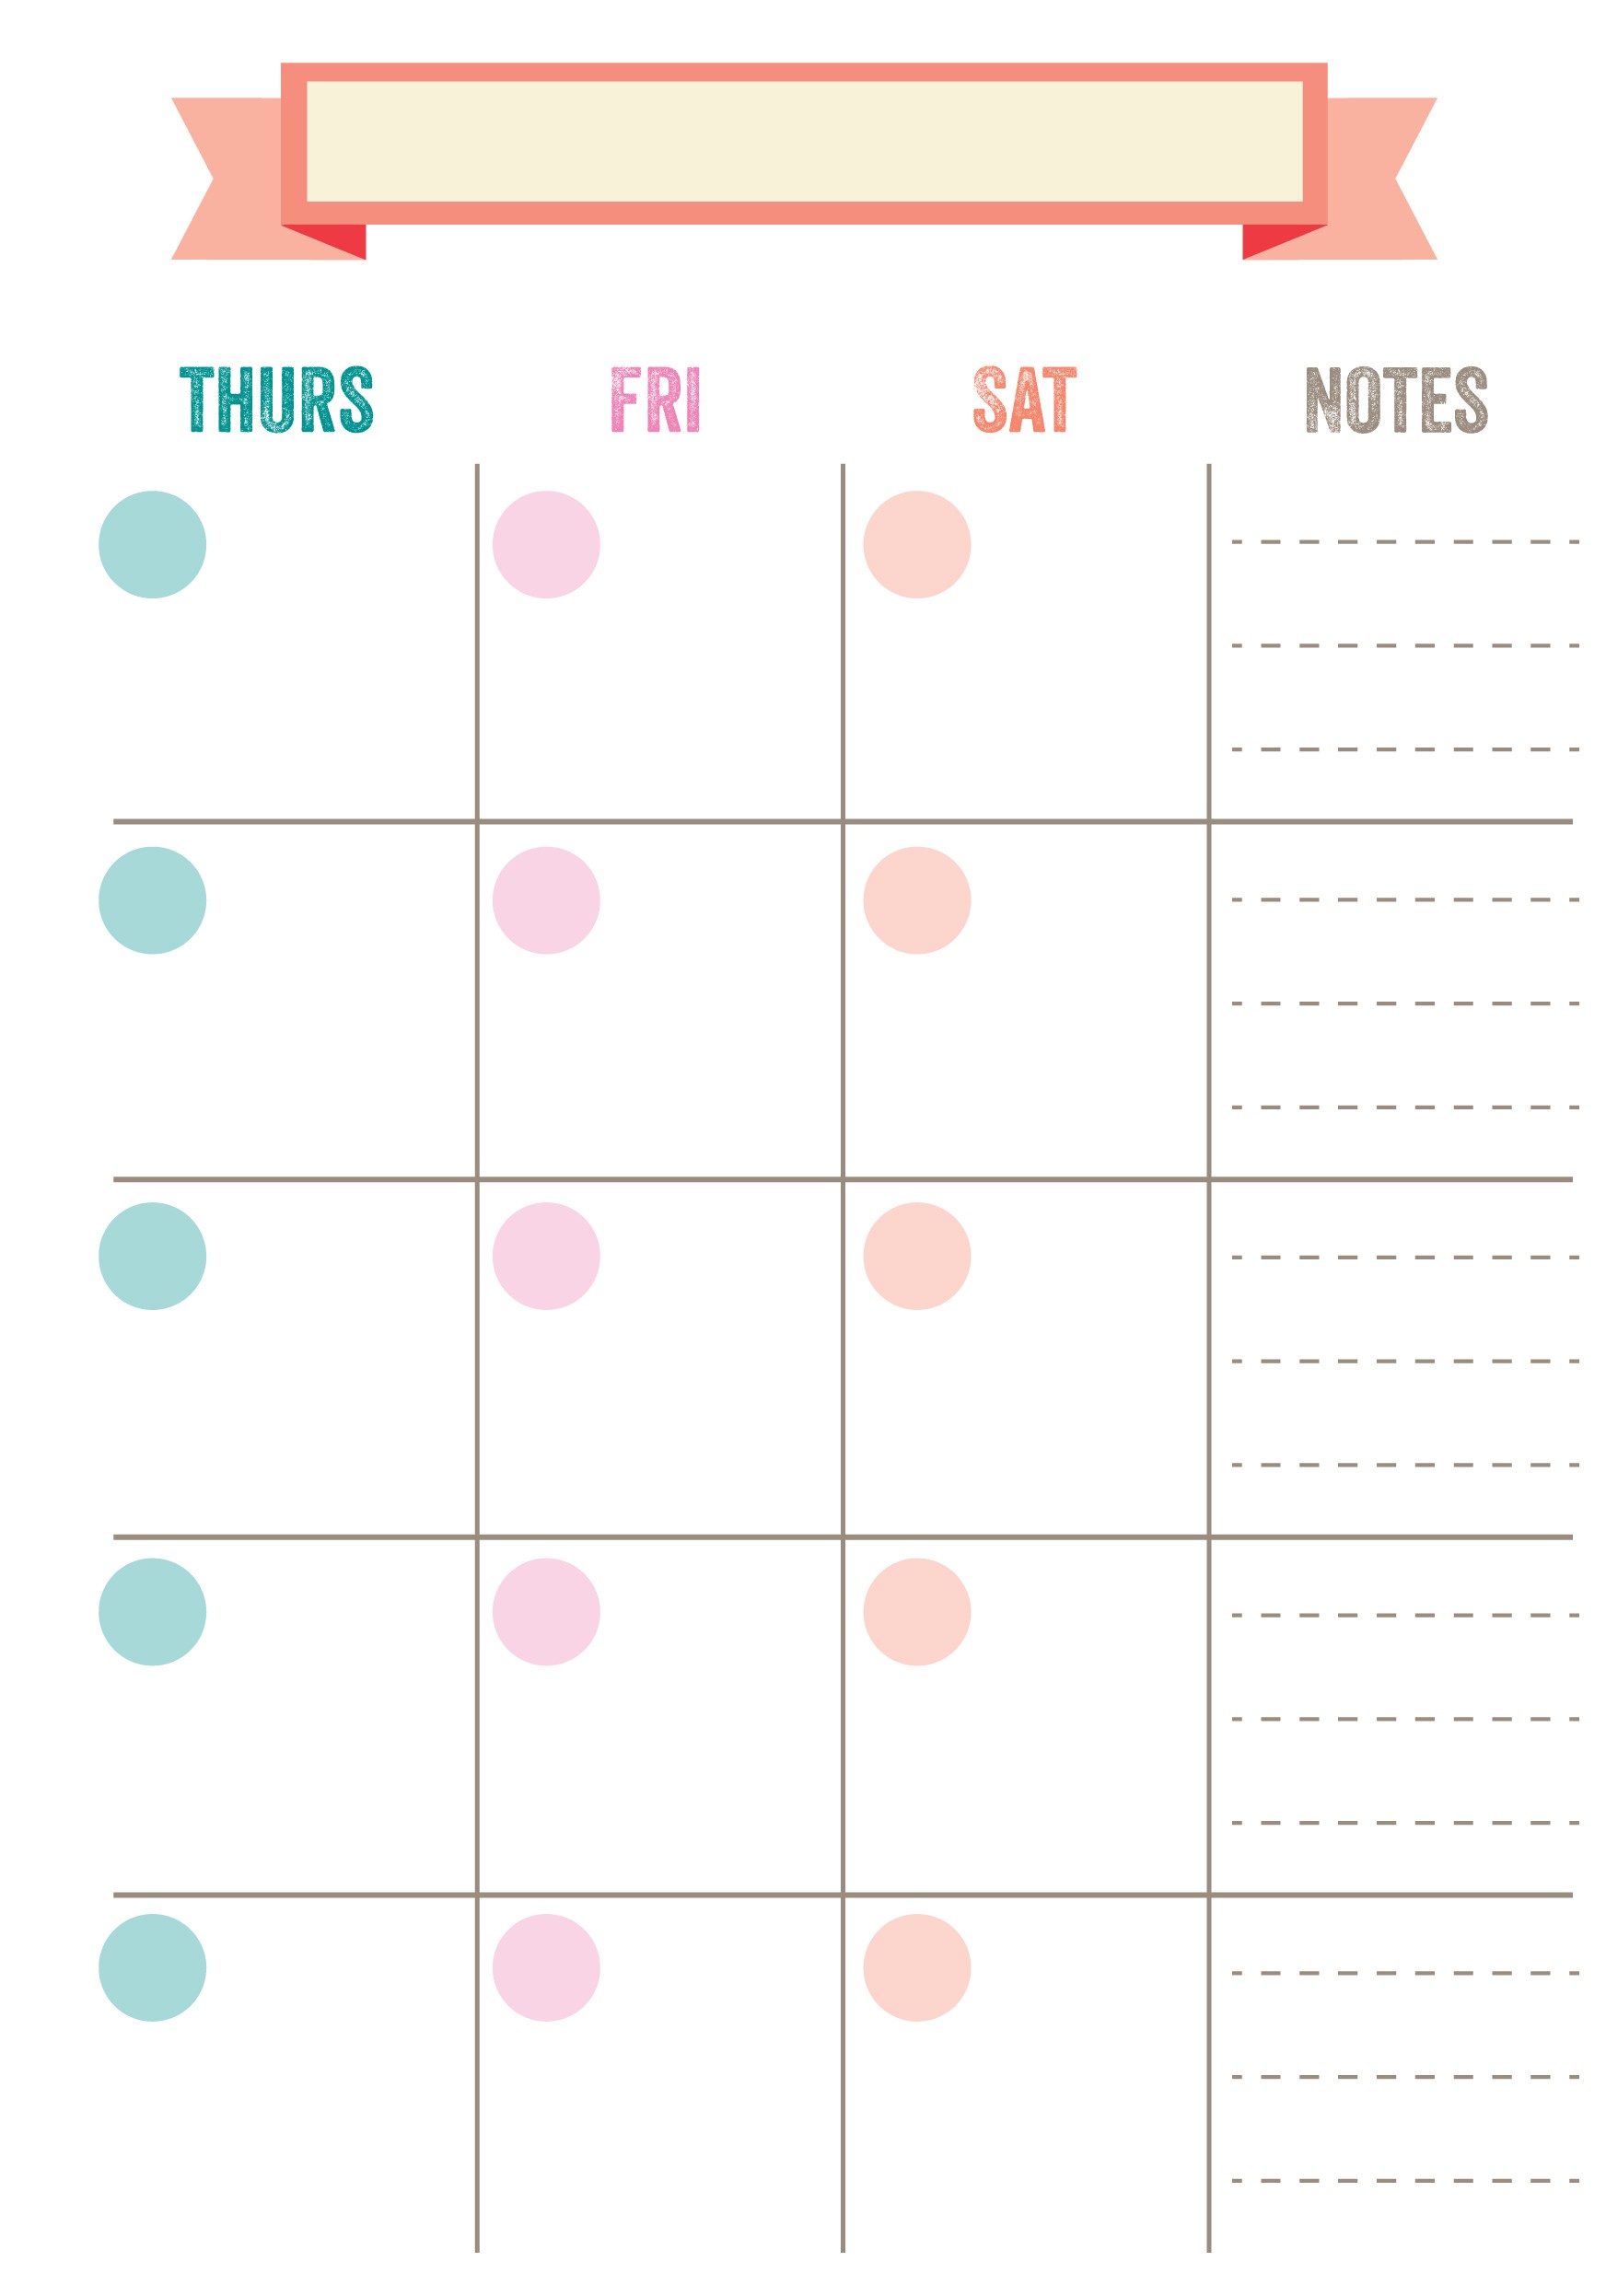 planner-printable-images-gallery-category-page-2-printablee